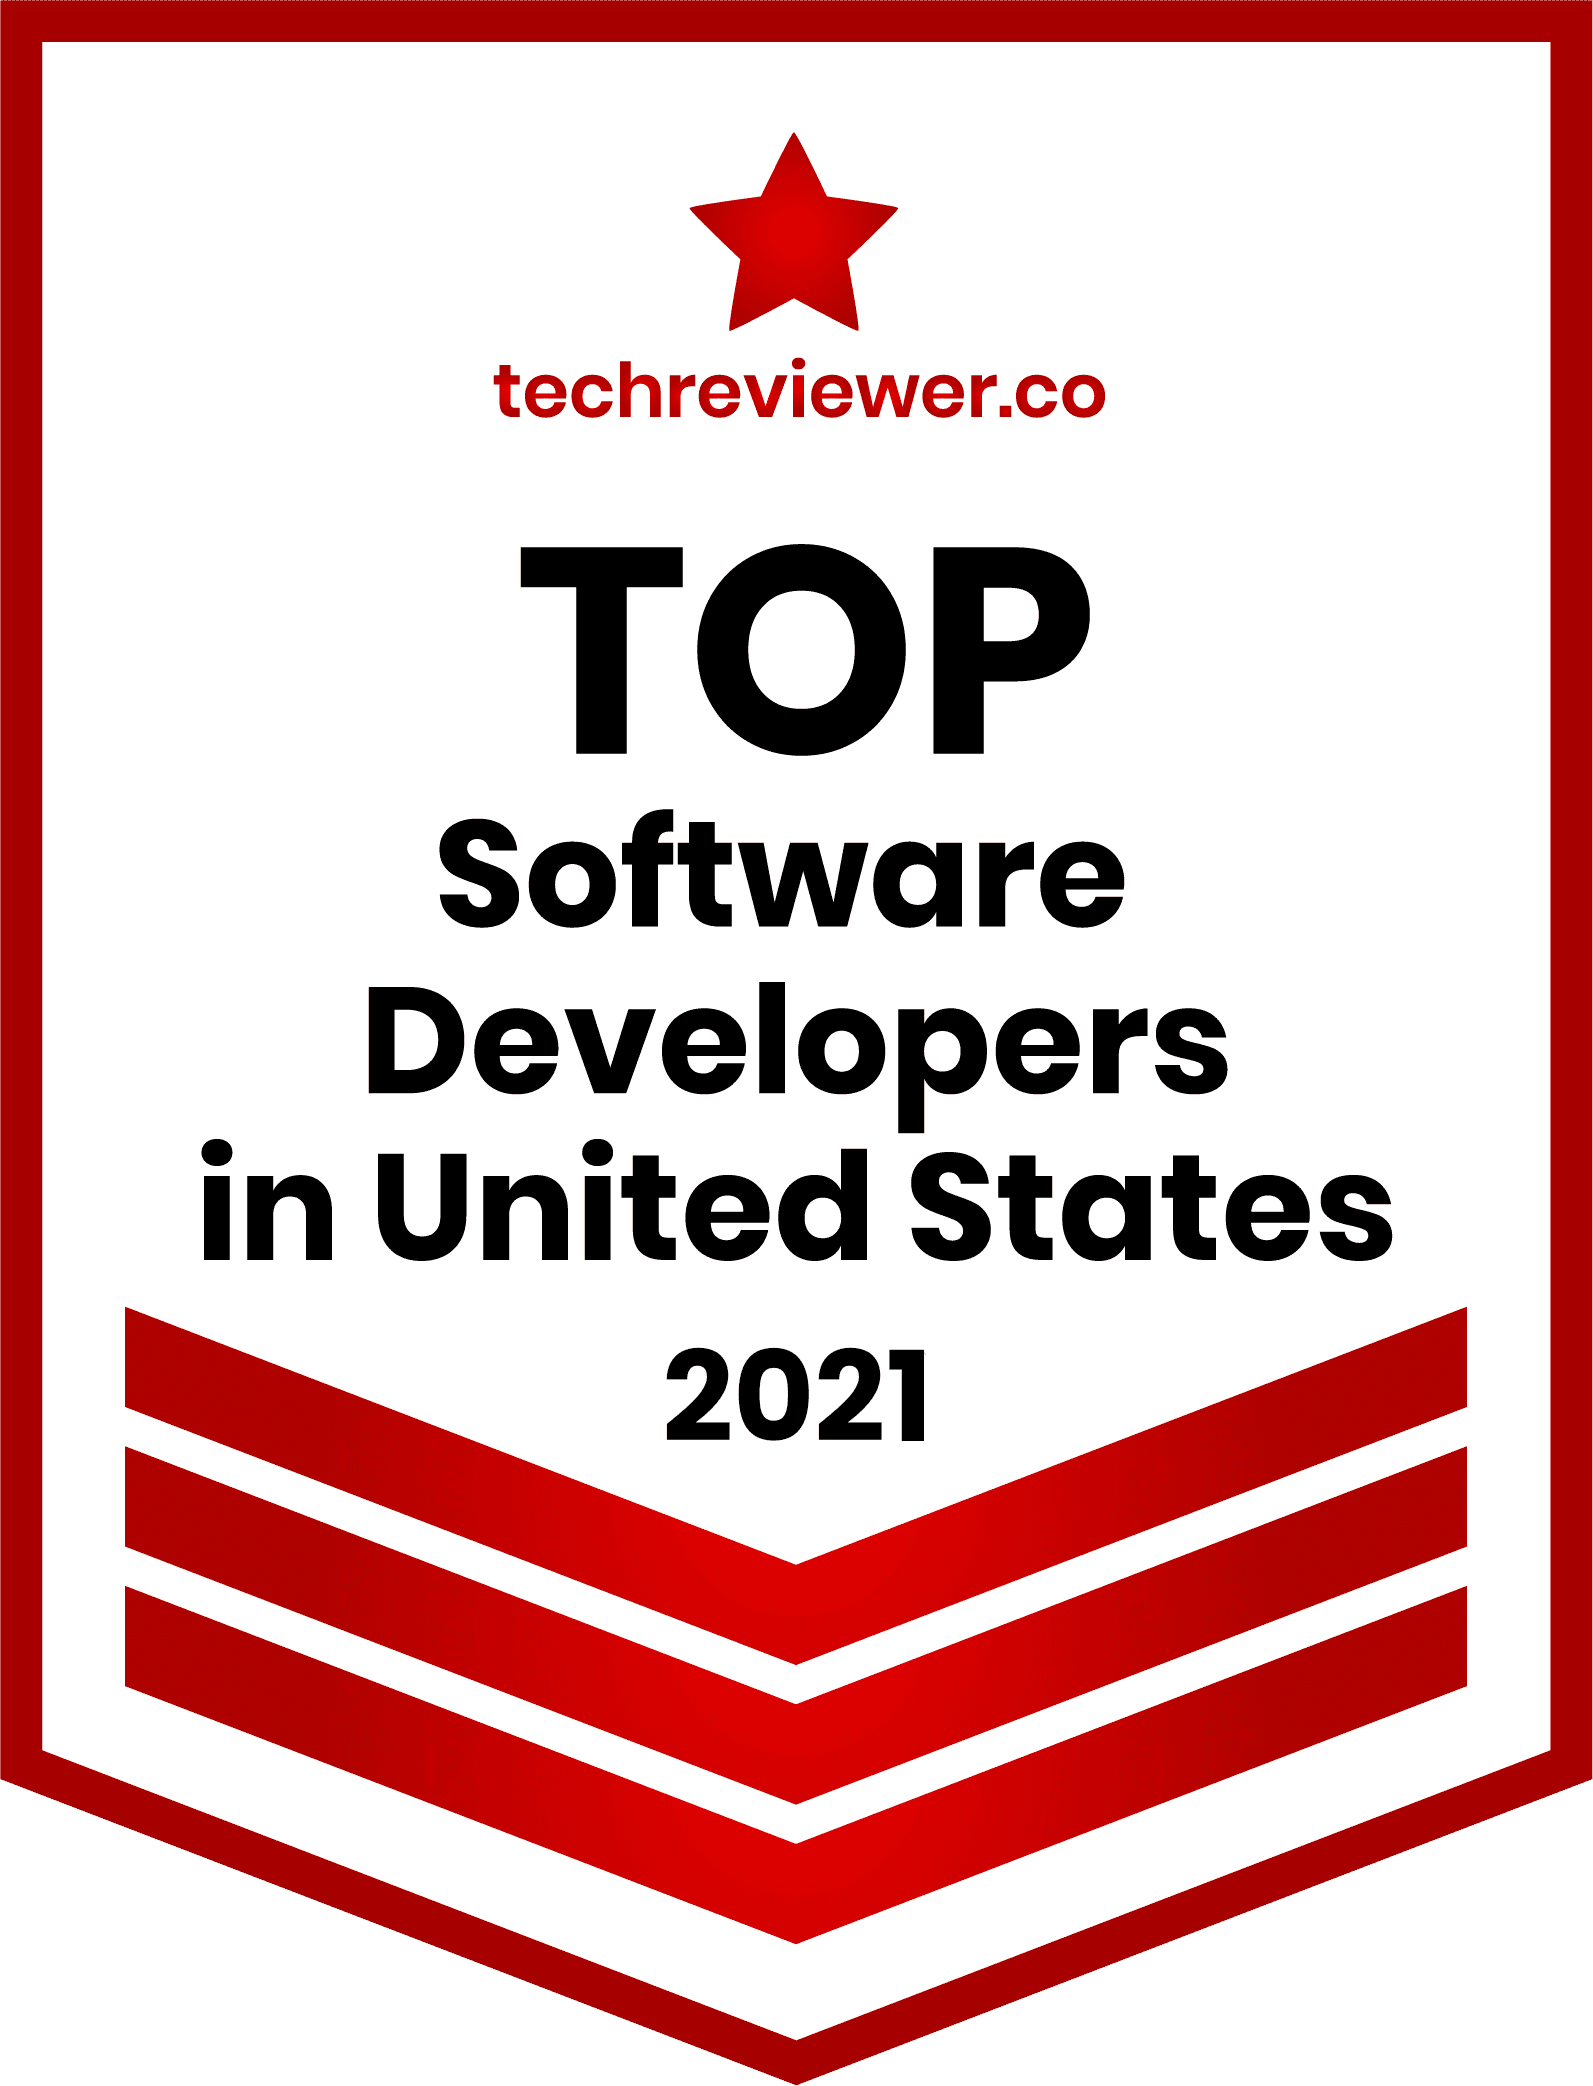 Top Software Development Companies in USA in 2021